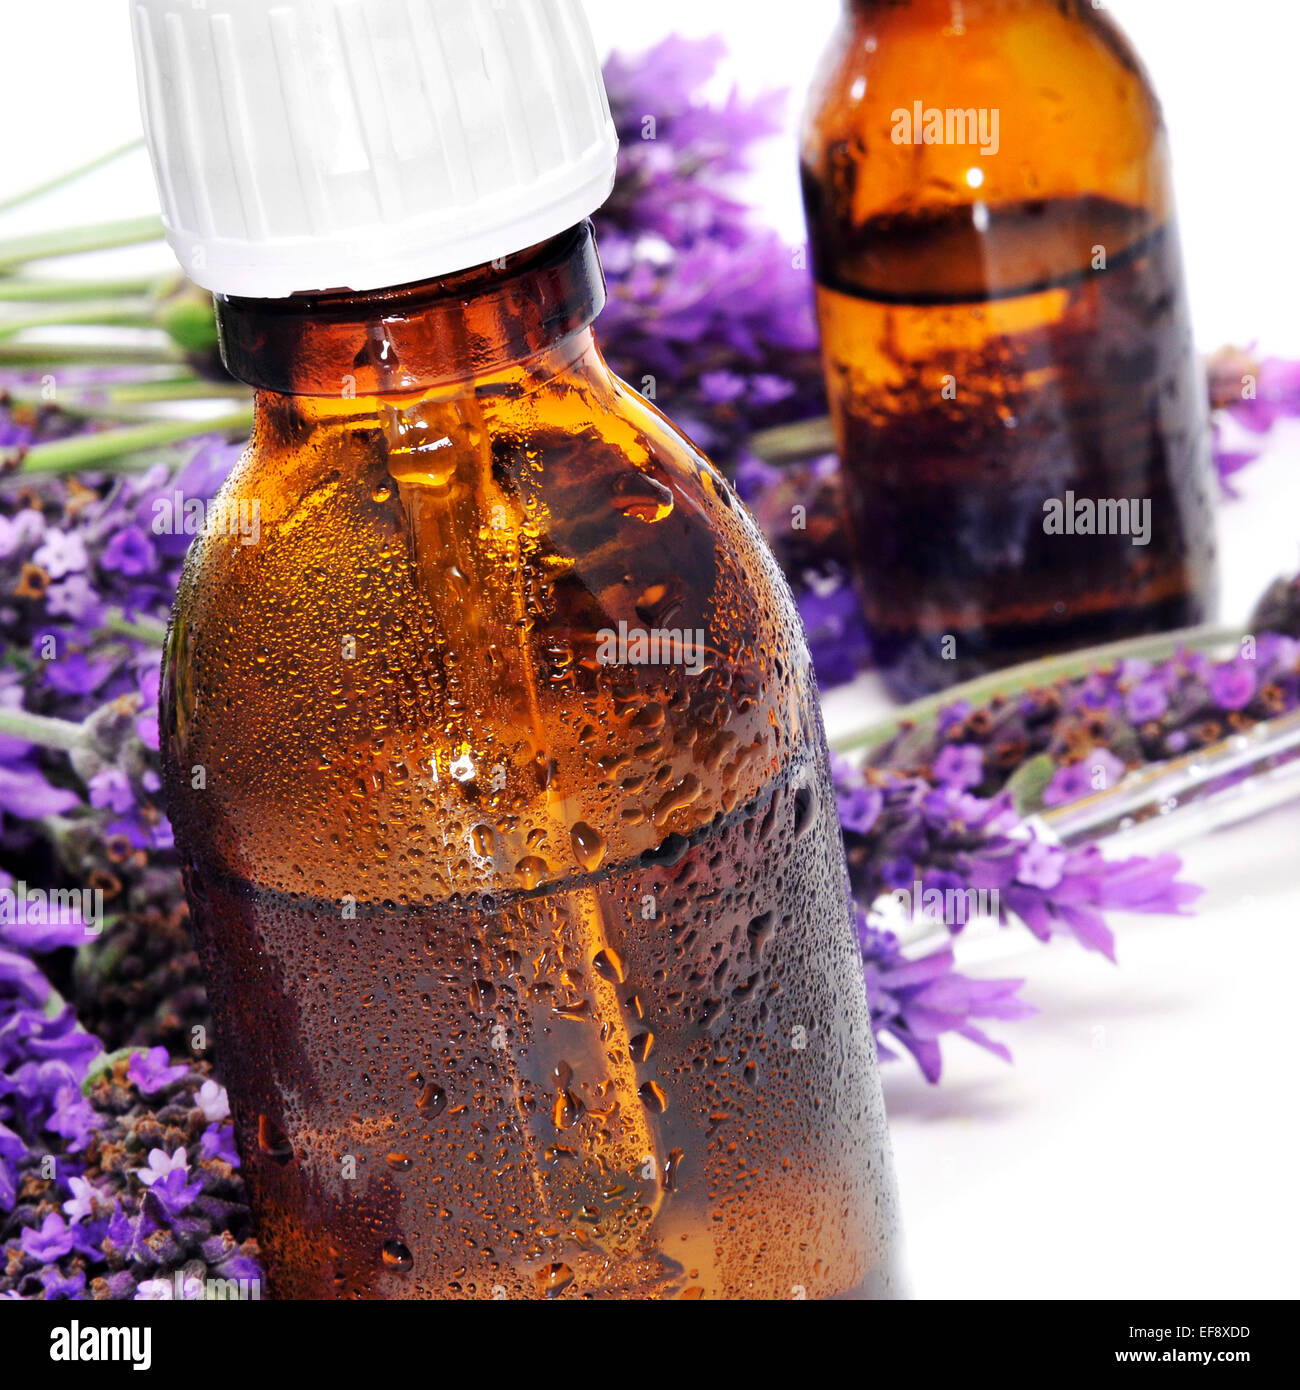 closeup of some dropper bottles with natural remedies and a pile of lavender flowers on a white background Stock Photo